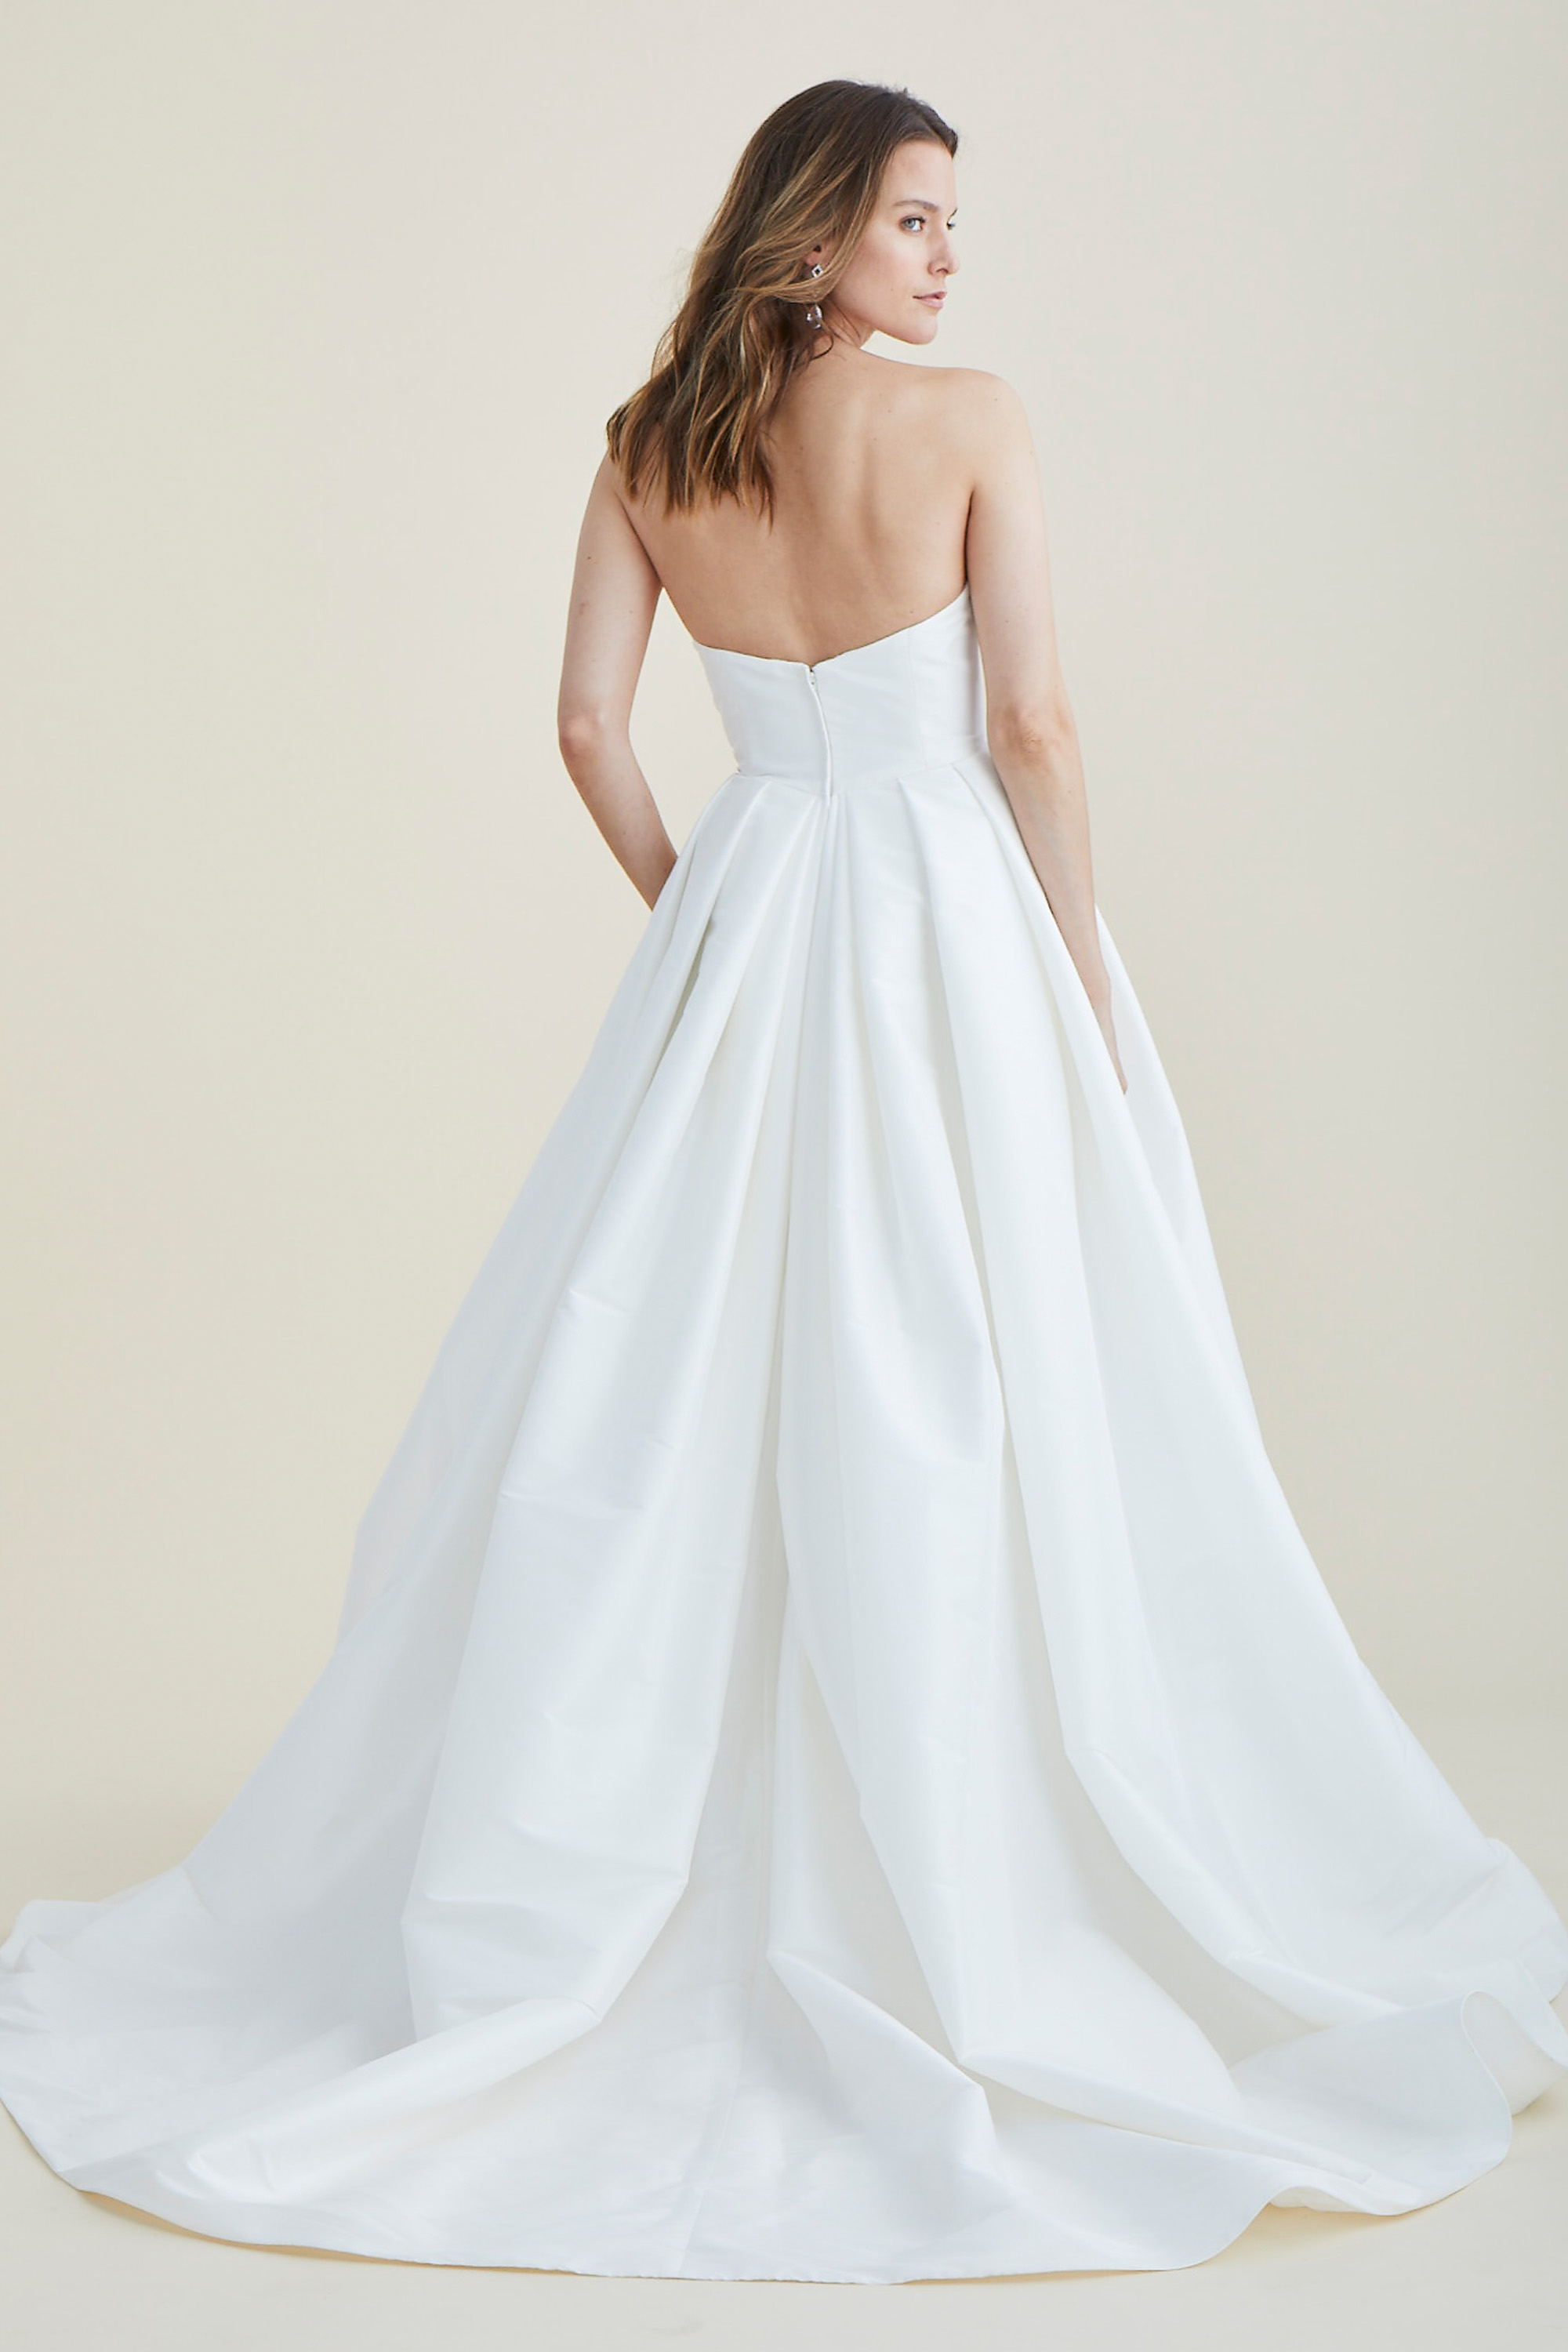 Dream gown